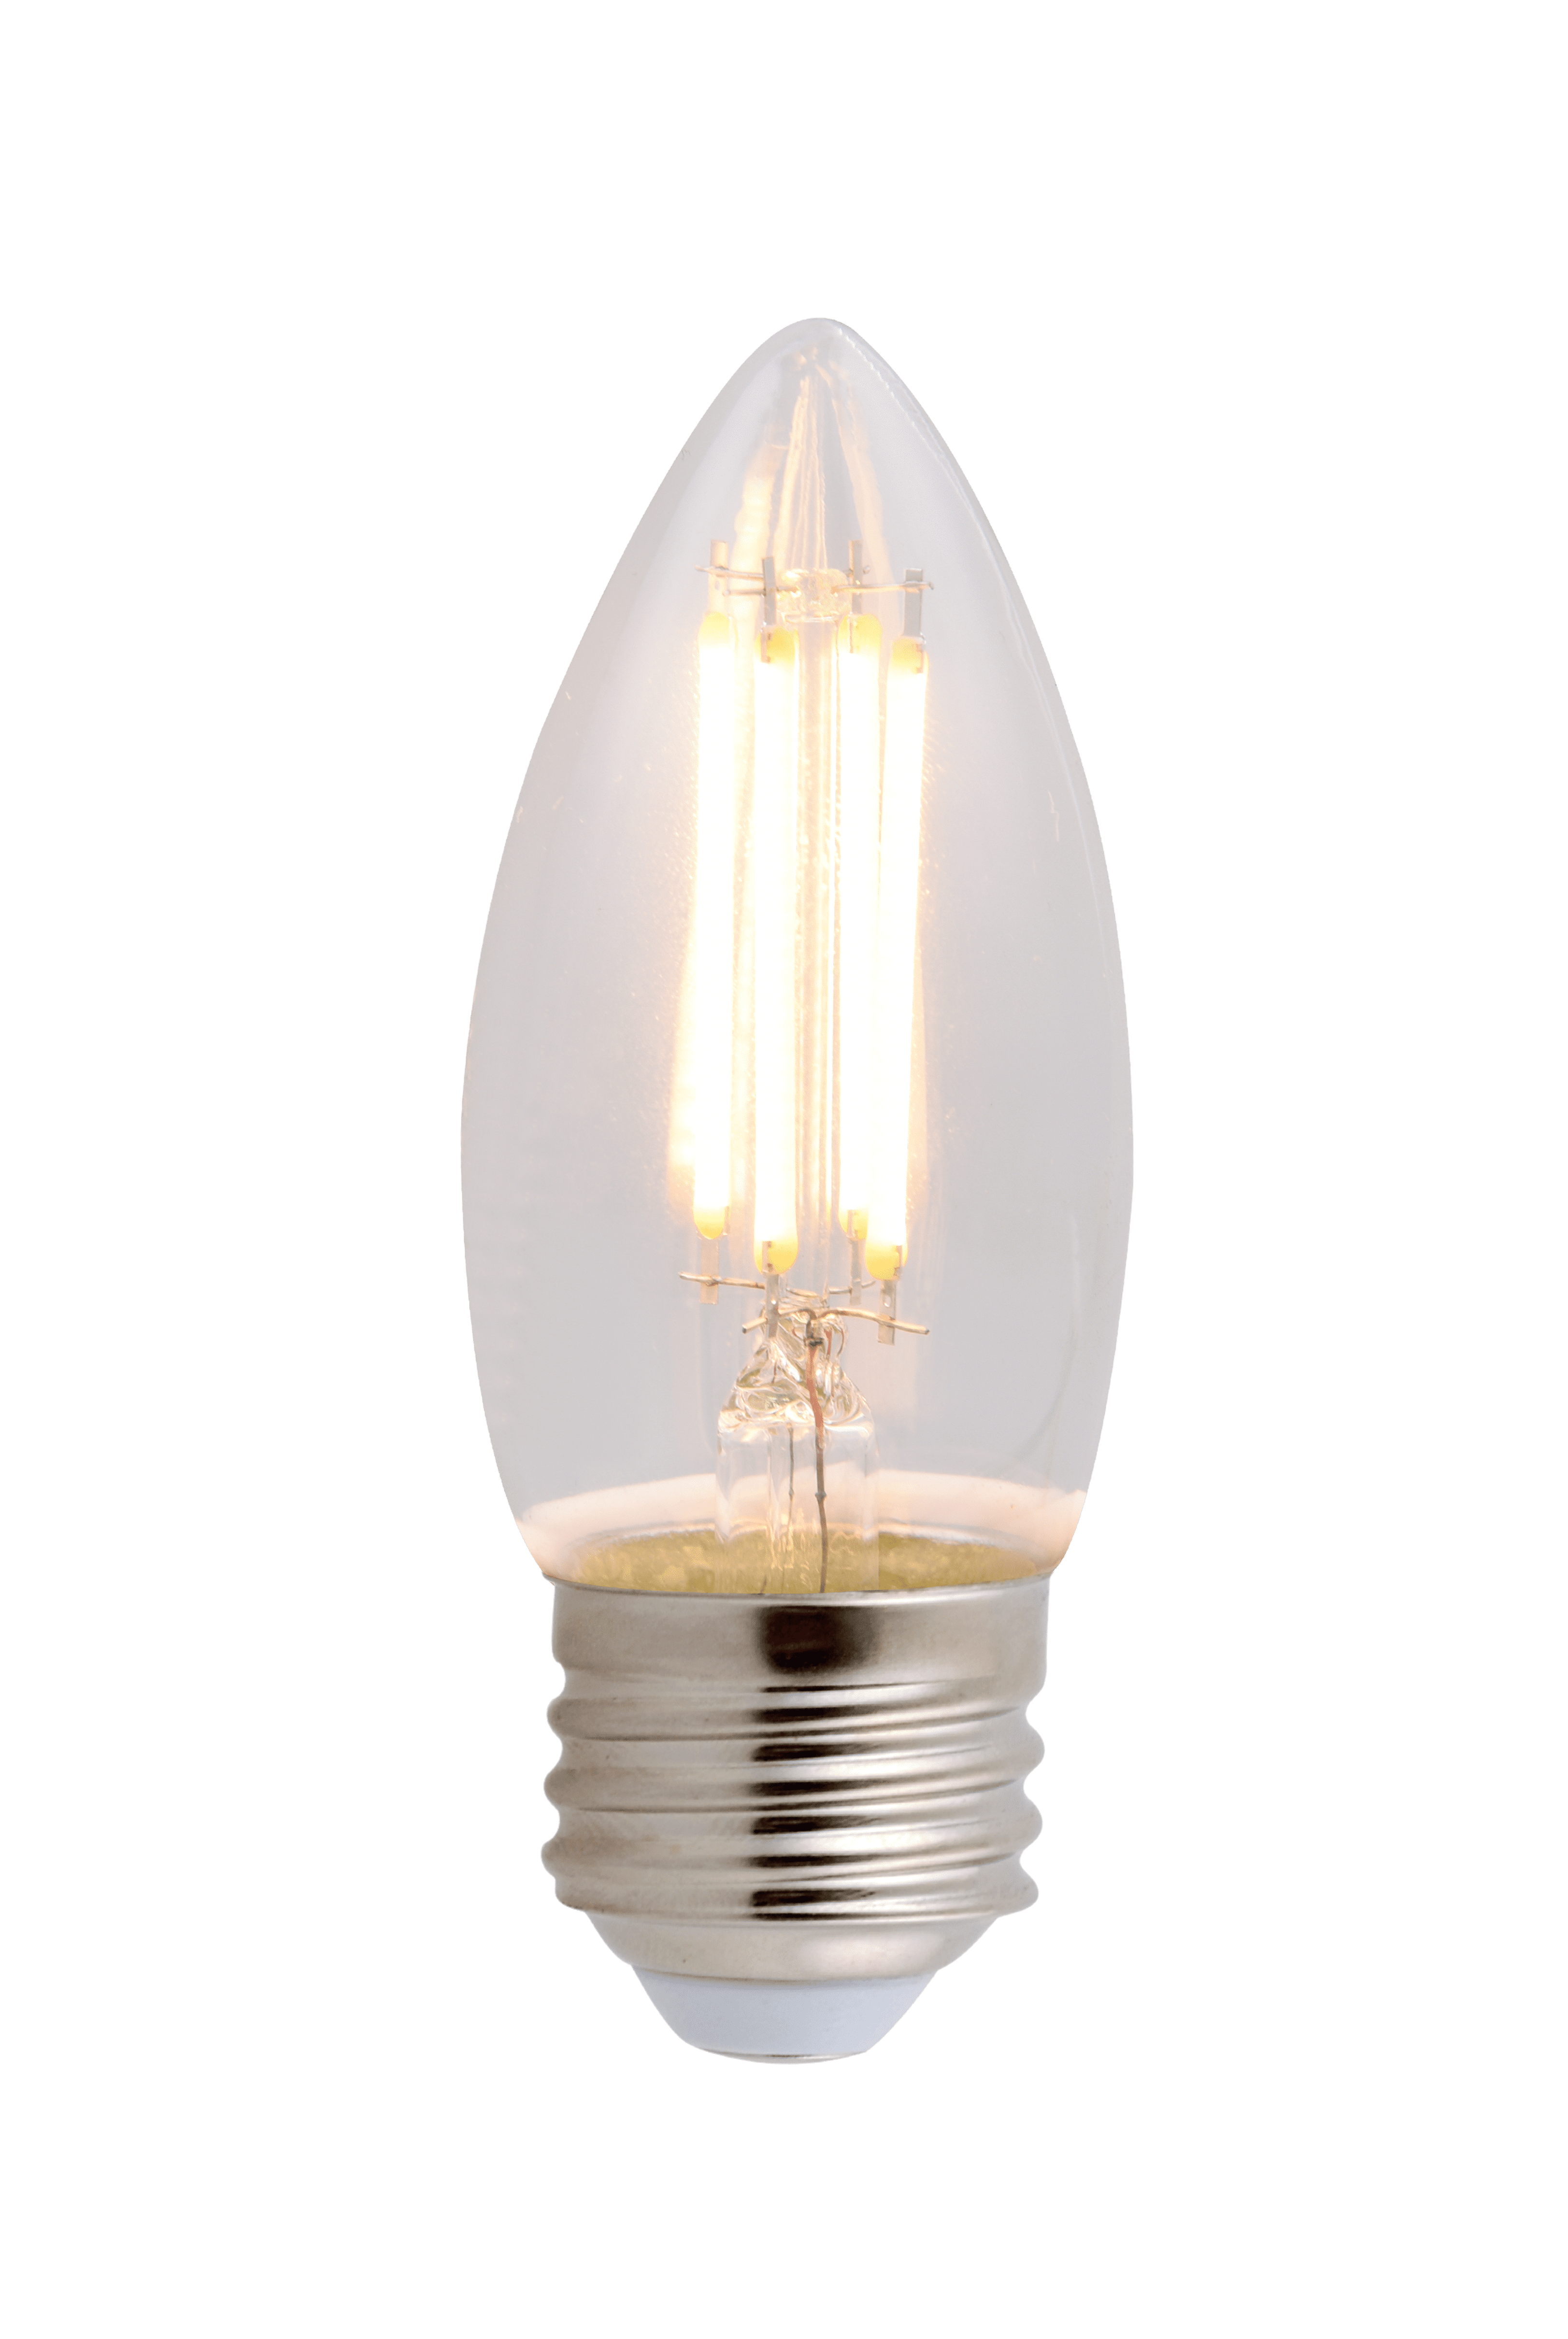 Better Homes & Gardens LED Vintage Style Light Bulb,Candle 60 Watts Soft White Classic Filament,Medium Base,Dimmable,4 Pack